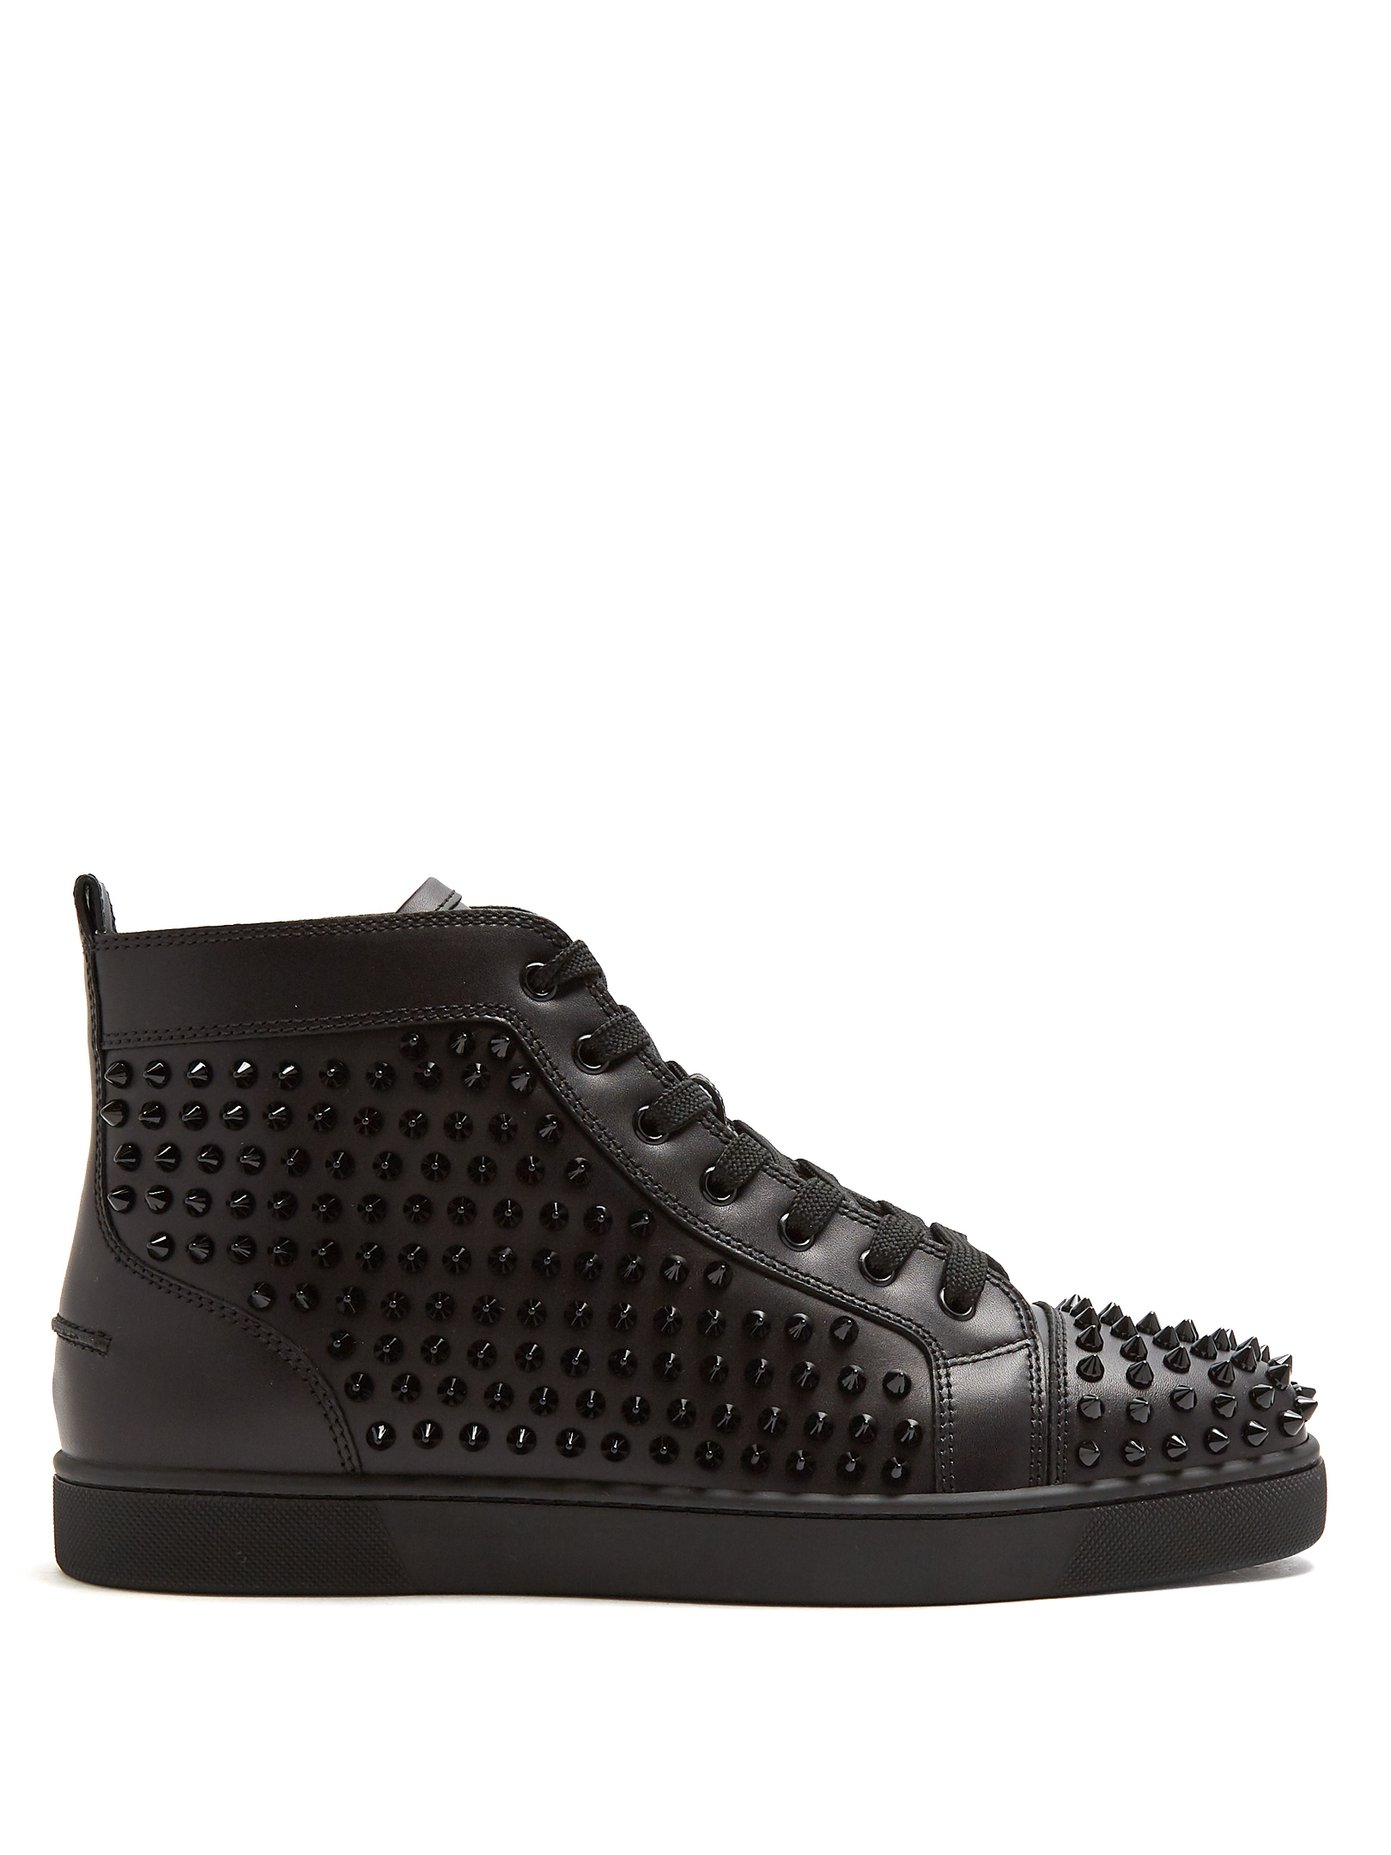 christian louboutin black with spikes